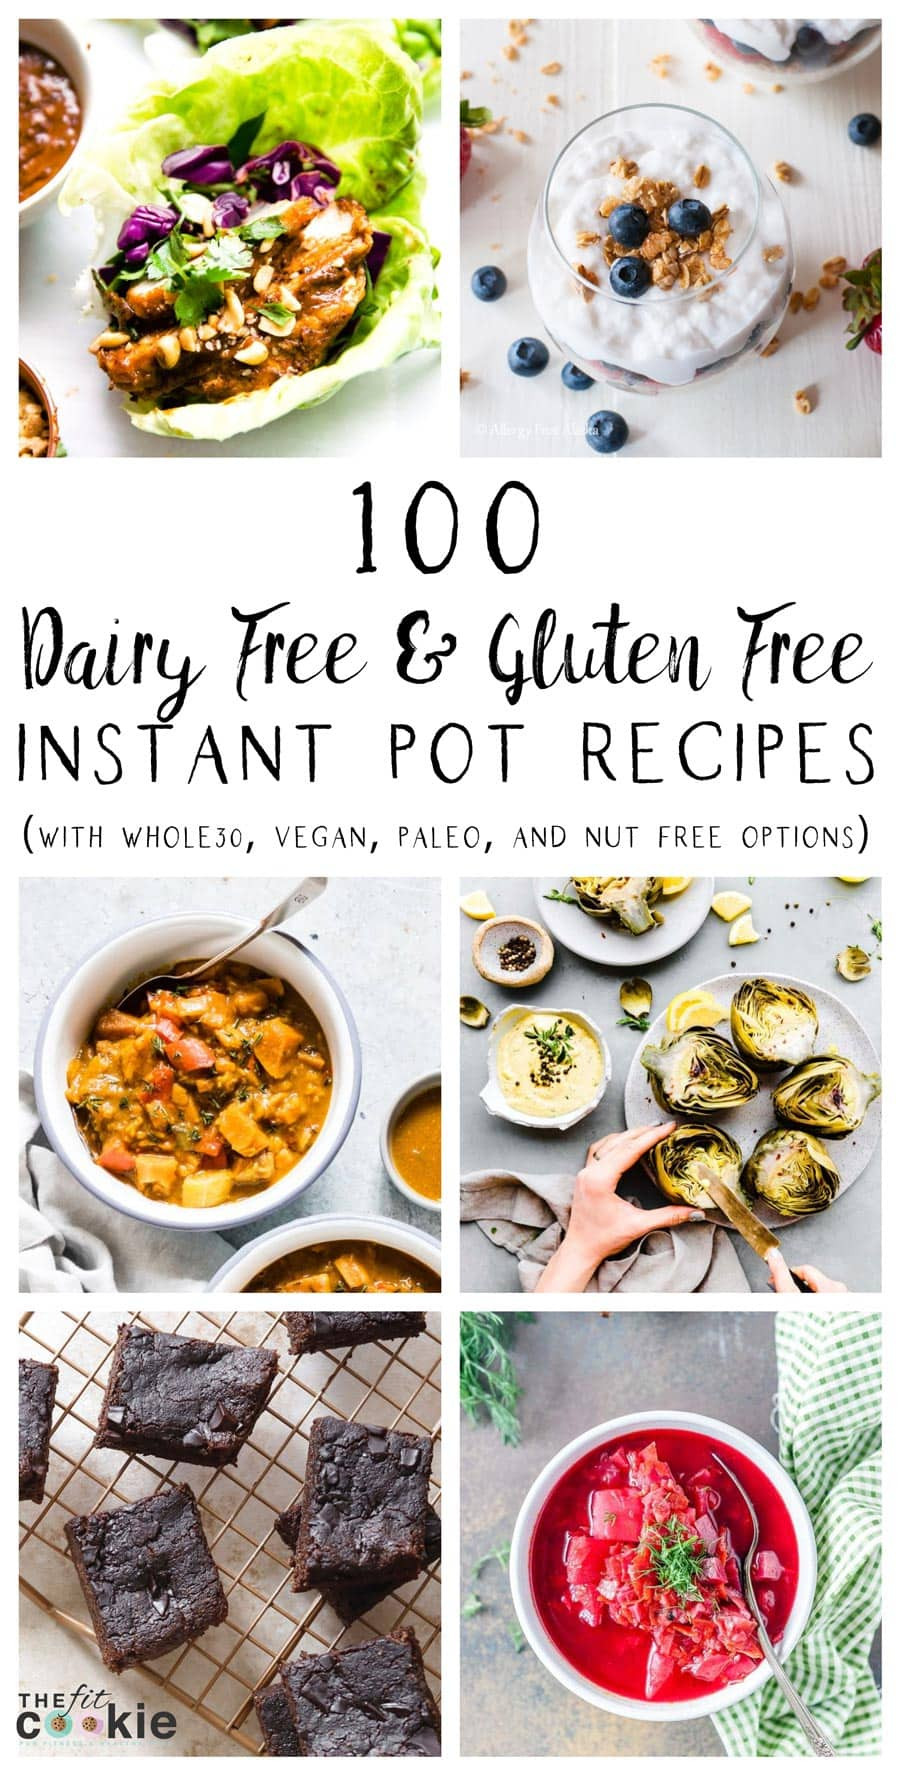 Gluten Free Instant Pot Recipes
 100 Dairy Free and Gluten Free Instant Pot Recipes • The